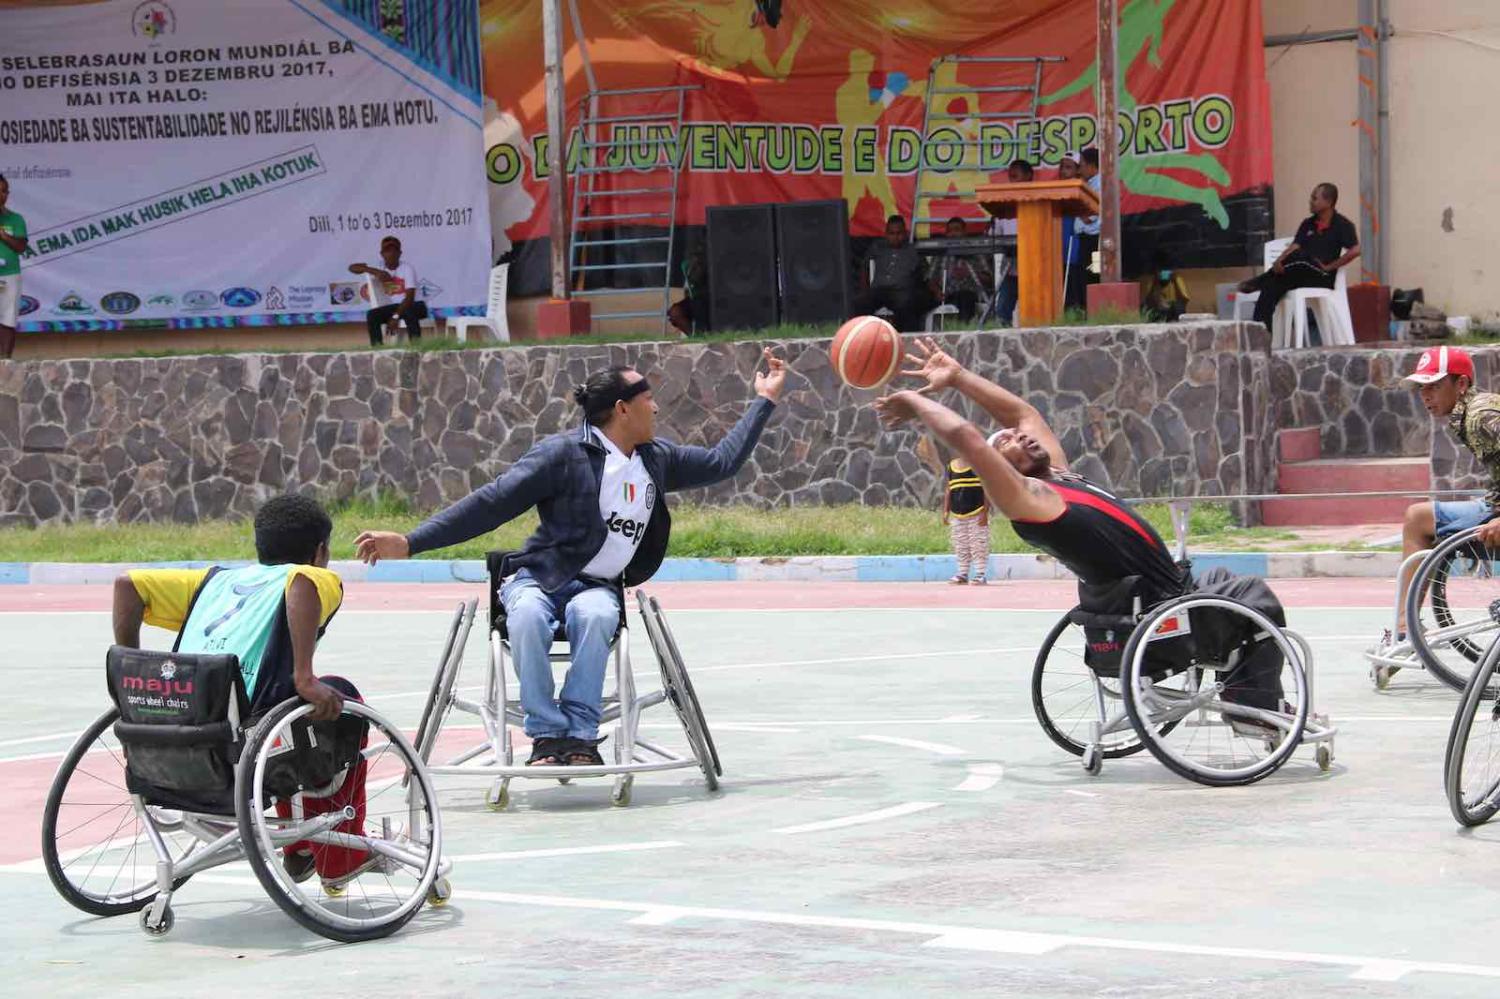 A DFAT-sponsored event in Timor-Leste to promote the rights of persons with disability, Dili, July 2017 (Department of Foreign Affairs and Trade/Flickr)